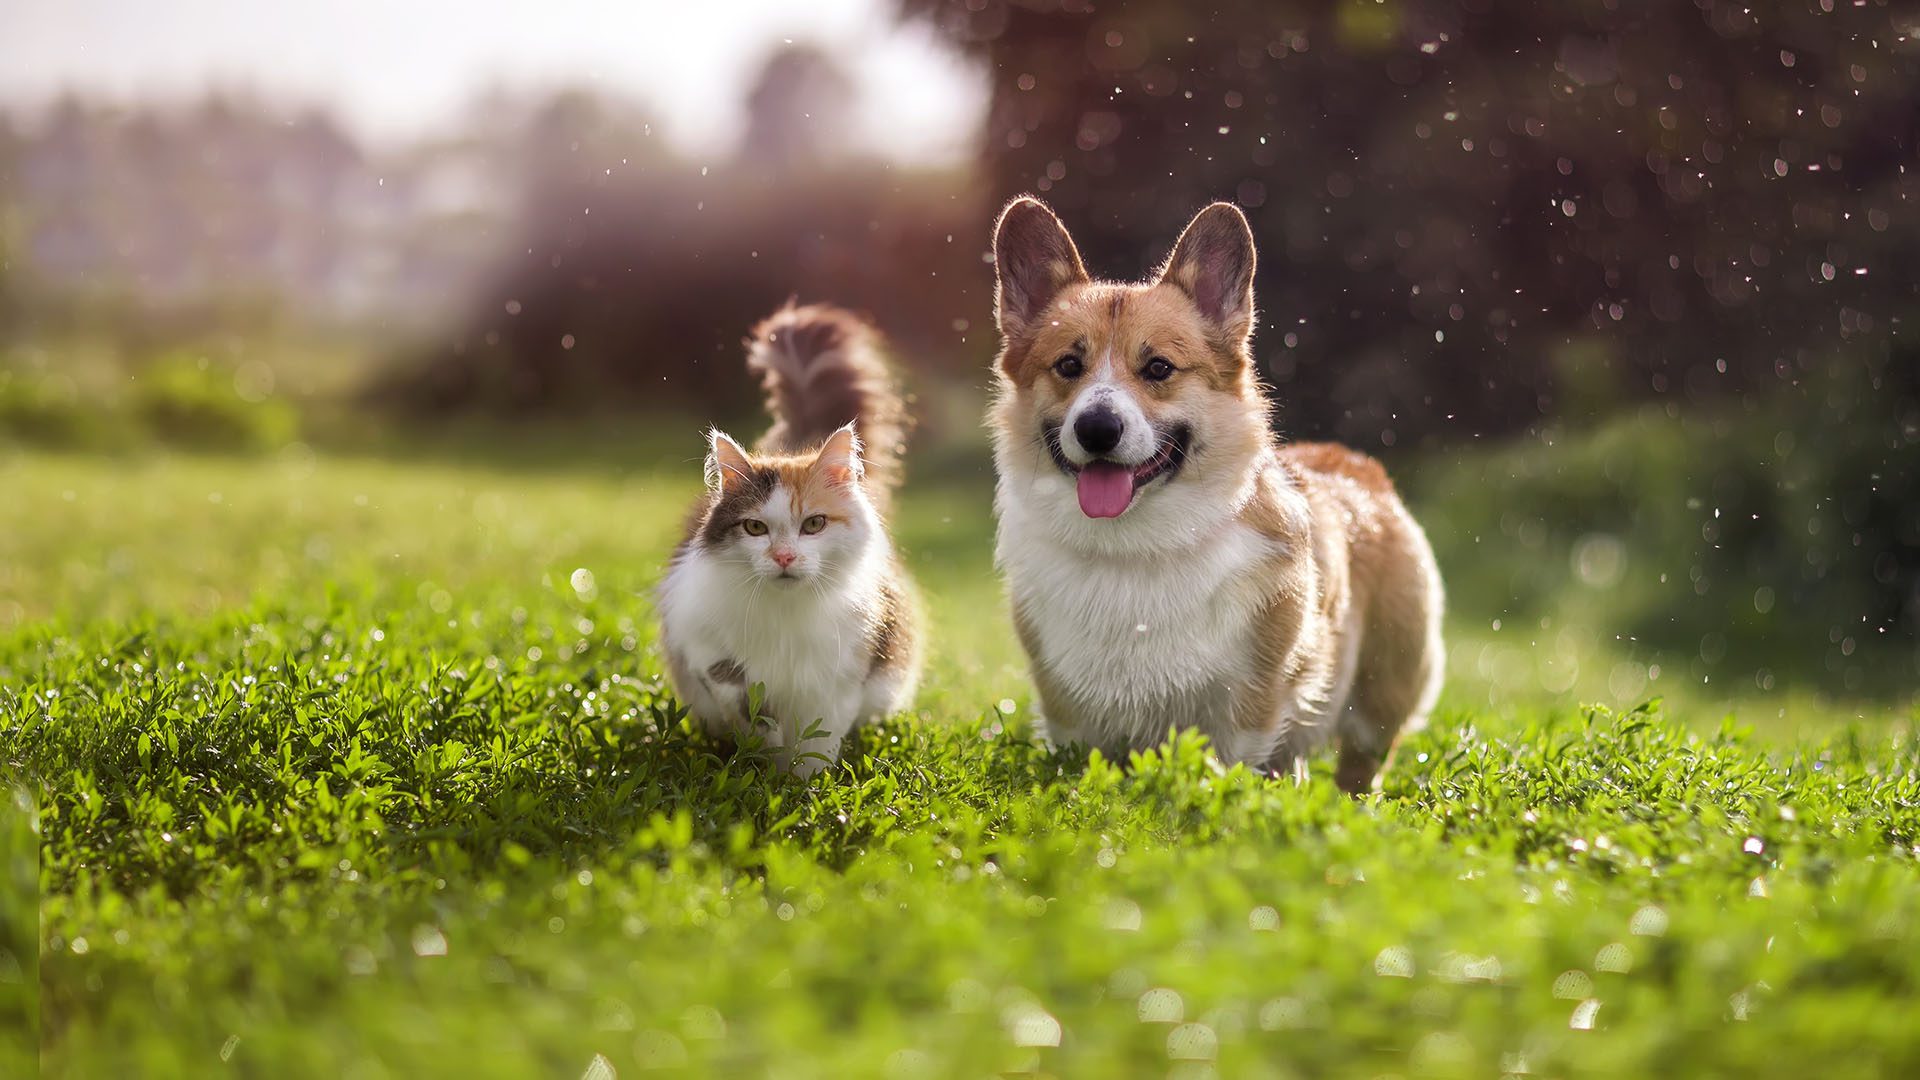 White and brown cat standing with a Corgi outside on a field of grass.